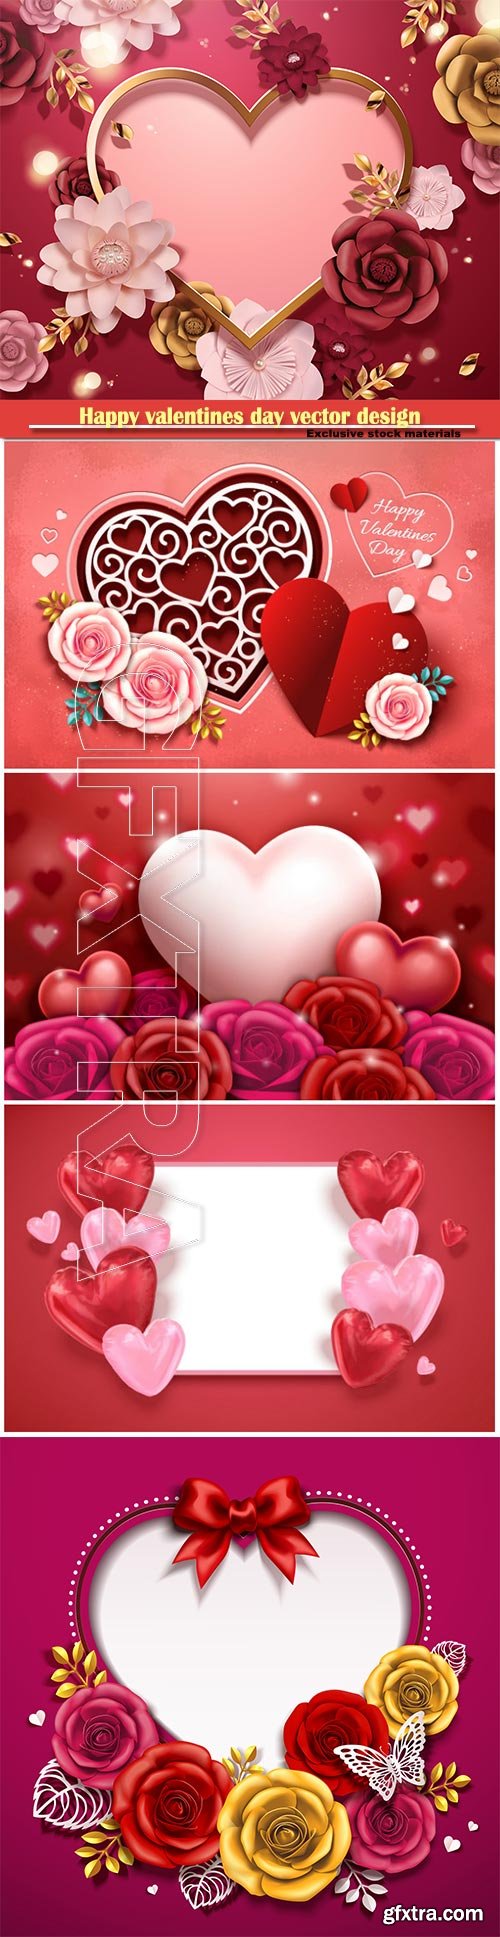 Happy valentines day vector design with heart, balloons, roses in 3d illustration # 3